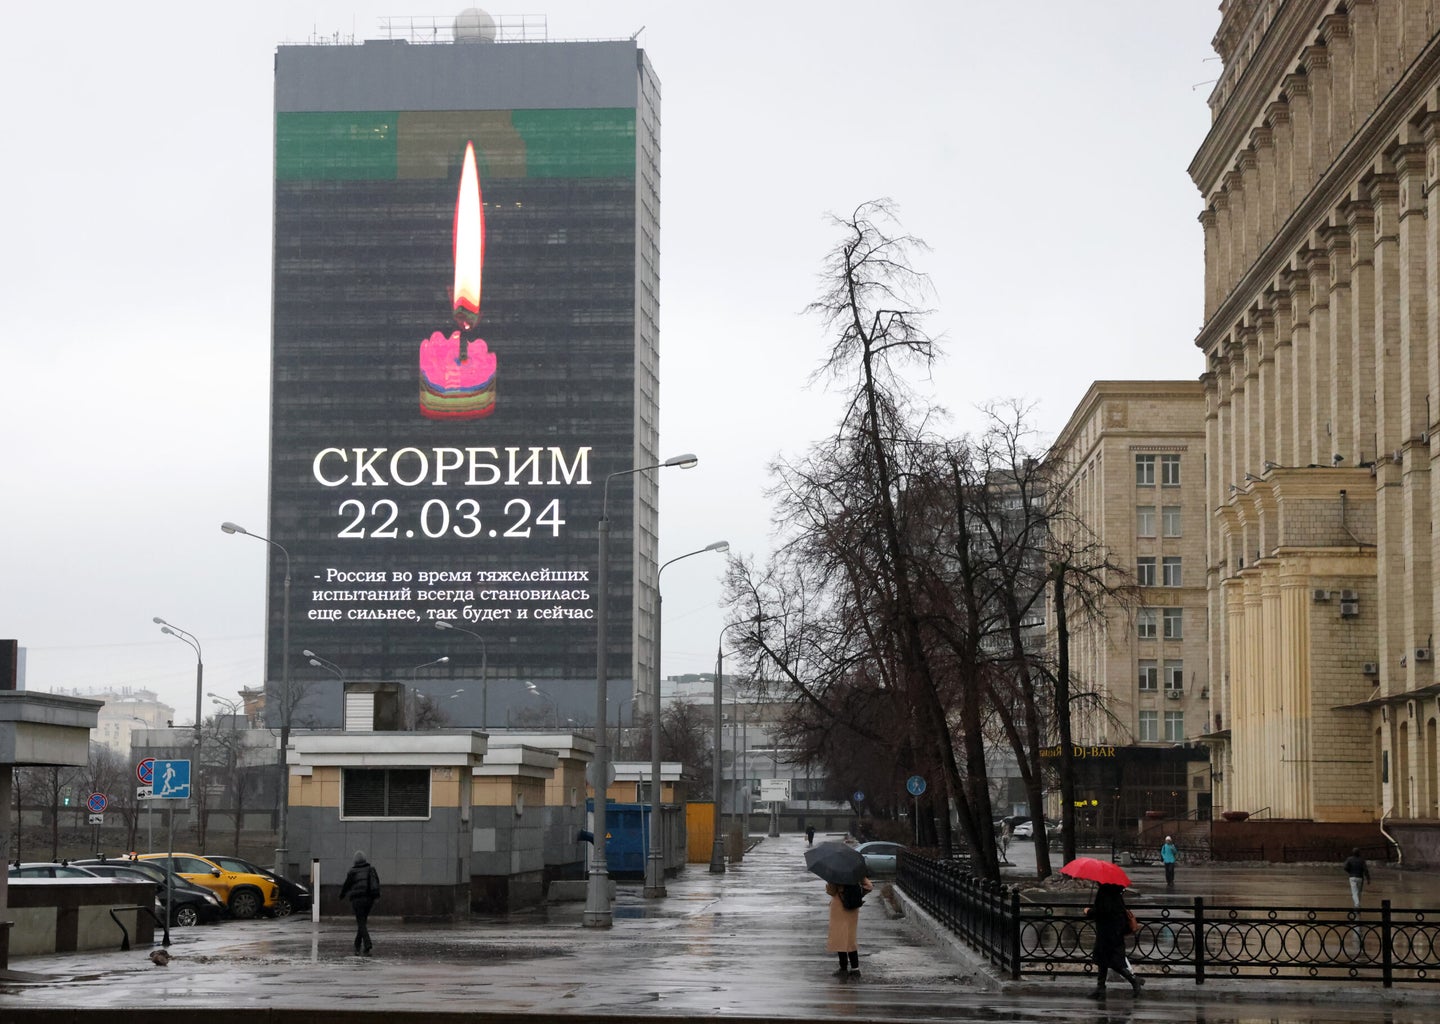 MOSCOW, RUSSIA - MARCH 24: (RUSSIA OUT) The sign "We mourn. 22.03.2024" and a picture of a candle are displayed on a building to respect the victims of the Crocus City Hall terrorist attack on March 24, 2024, in Moscow, Russia. According to official data, at least 100 people were killed in an attack by several gunmen opening fire during a concert by a local rock band at Crocus City Hall, which seats about 6200 people. The deadliest attack in recent years in Russia also left the concert hall in flames and the roof severely damaged. (Photo by Contributor/Getty Images)